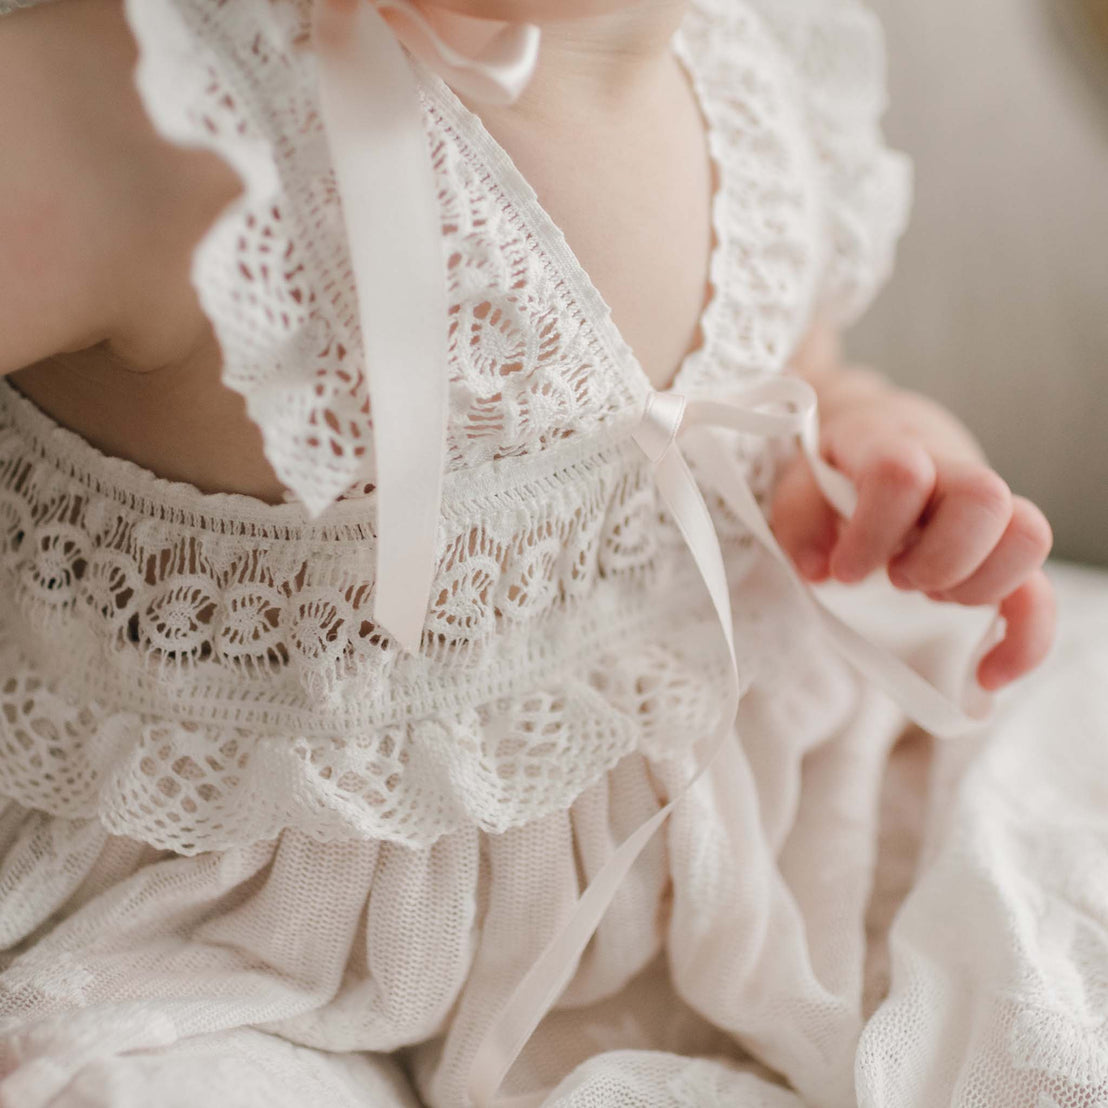 Close-up of a delicate Charlotte Christening Gown & Bonnet with intricate cotton lace details and a soft pink ribbon, displayed on a hanger. The texture of the fabric showcases a fine, detailed pattern.